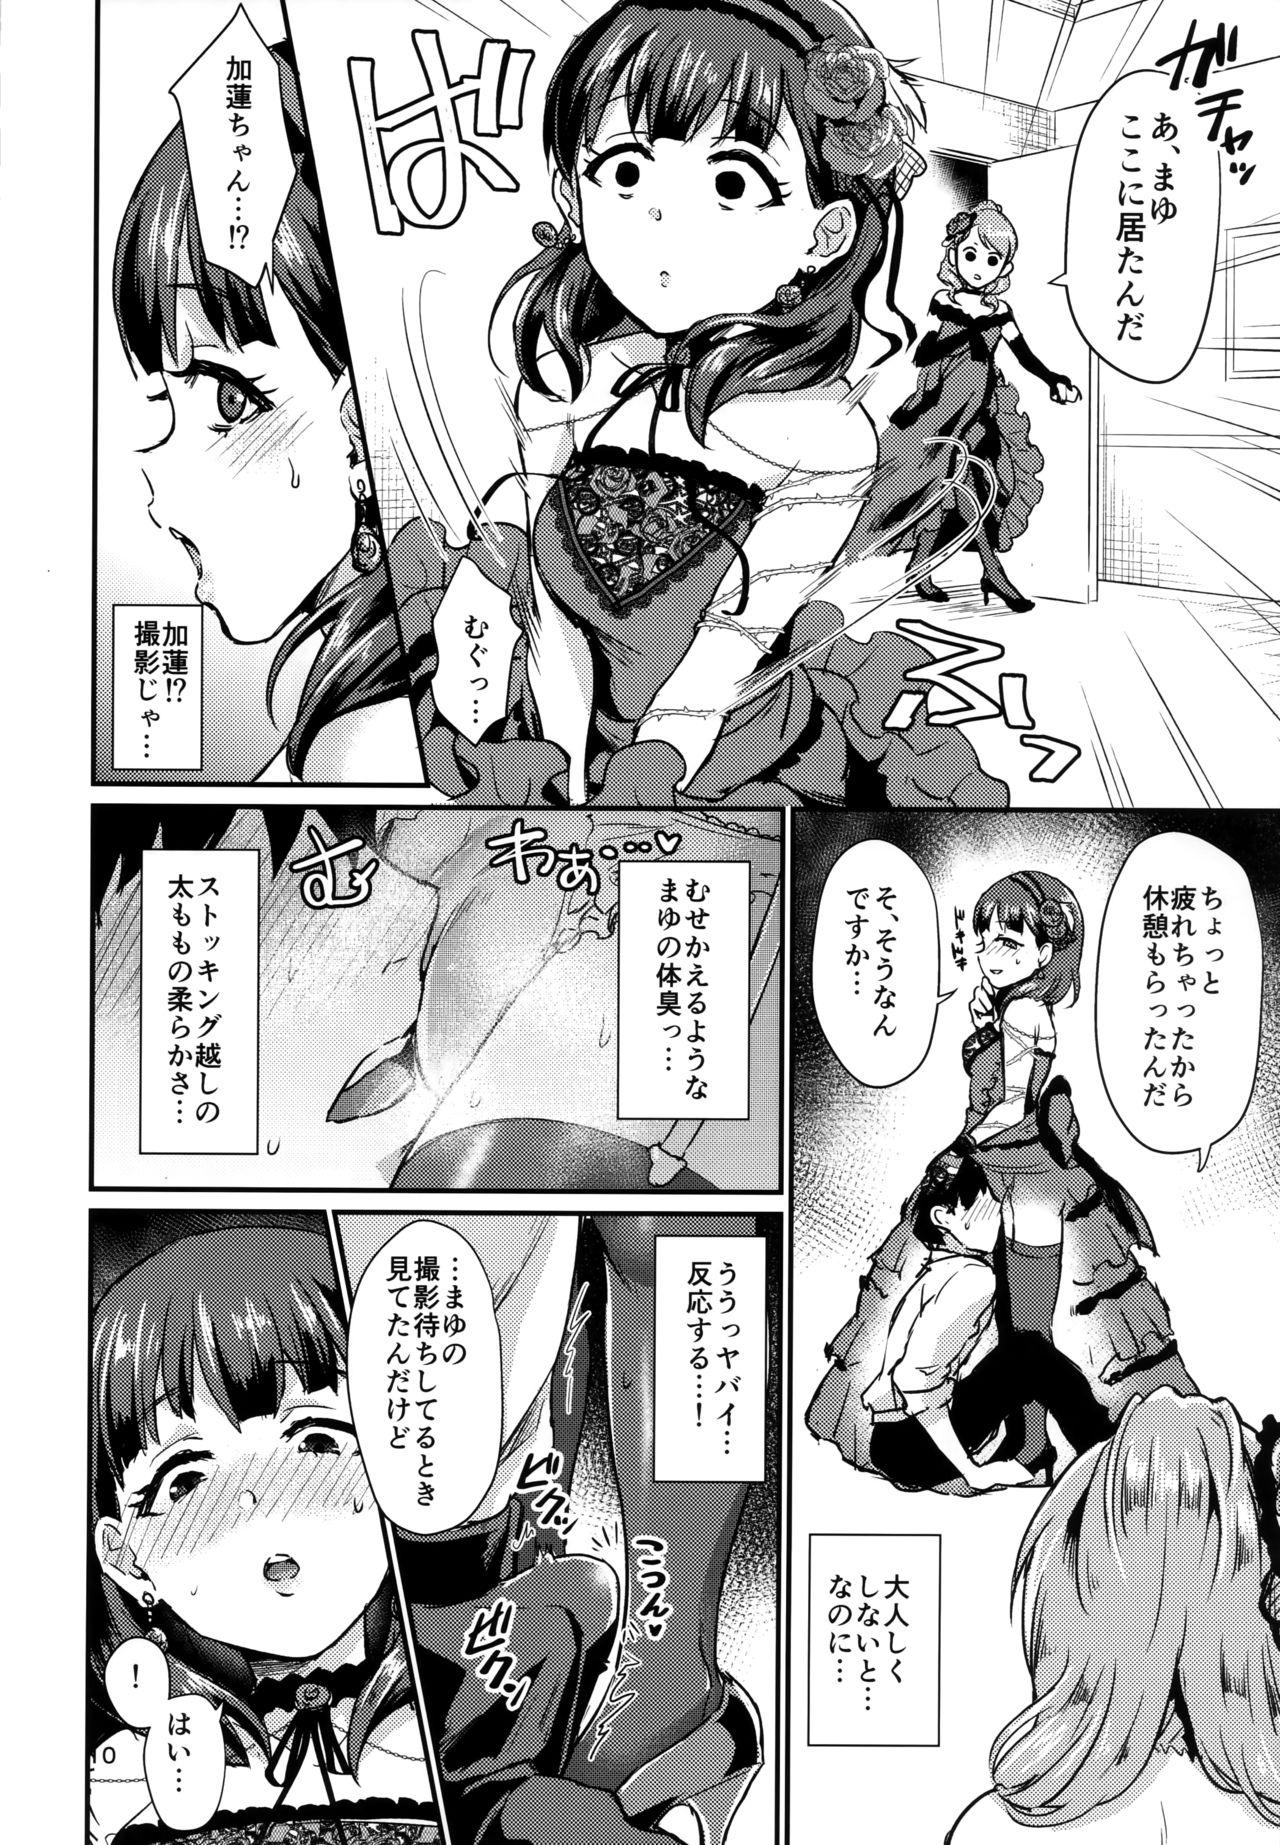 Ngentot Don't stop my pure love - The idolmaster Blowjob - Page 9